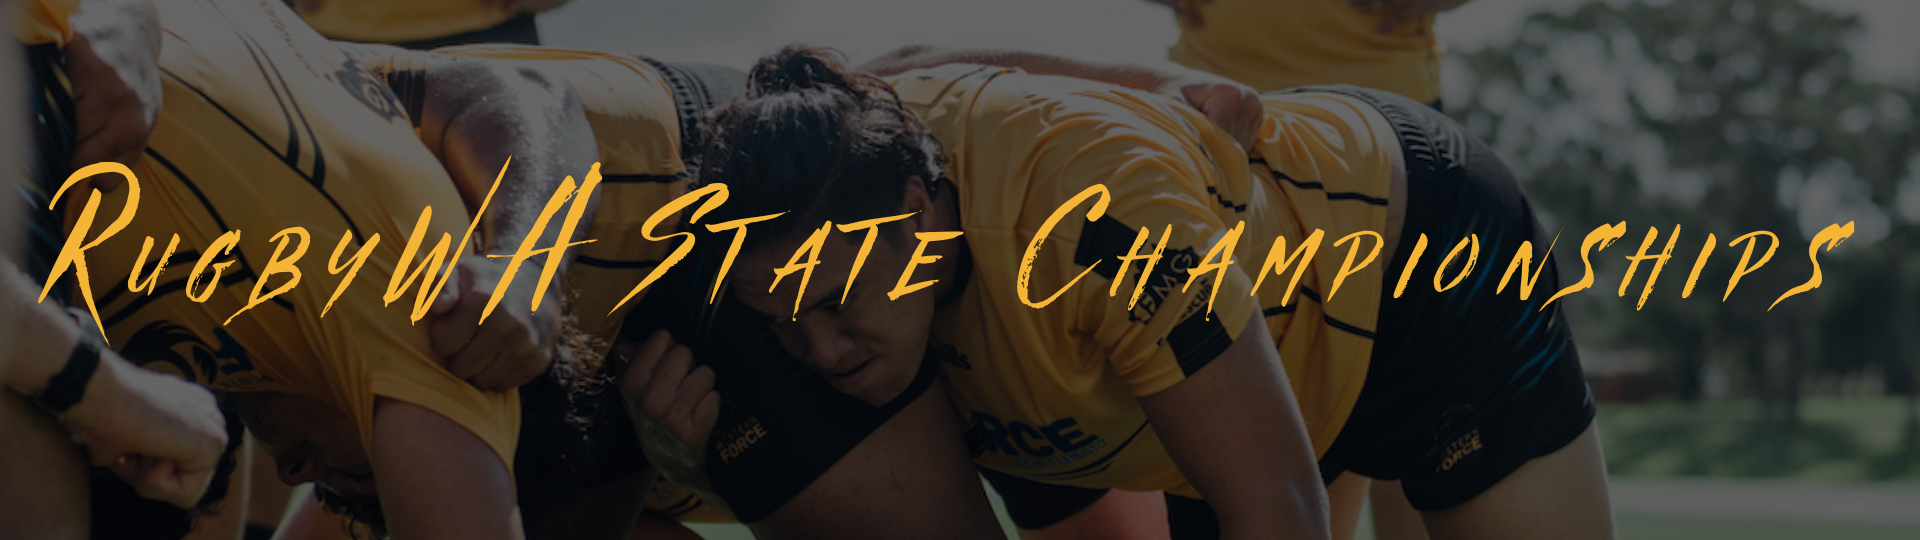 RugbyWA State Championships Programs Header